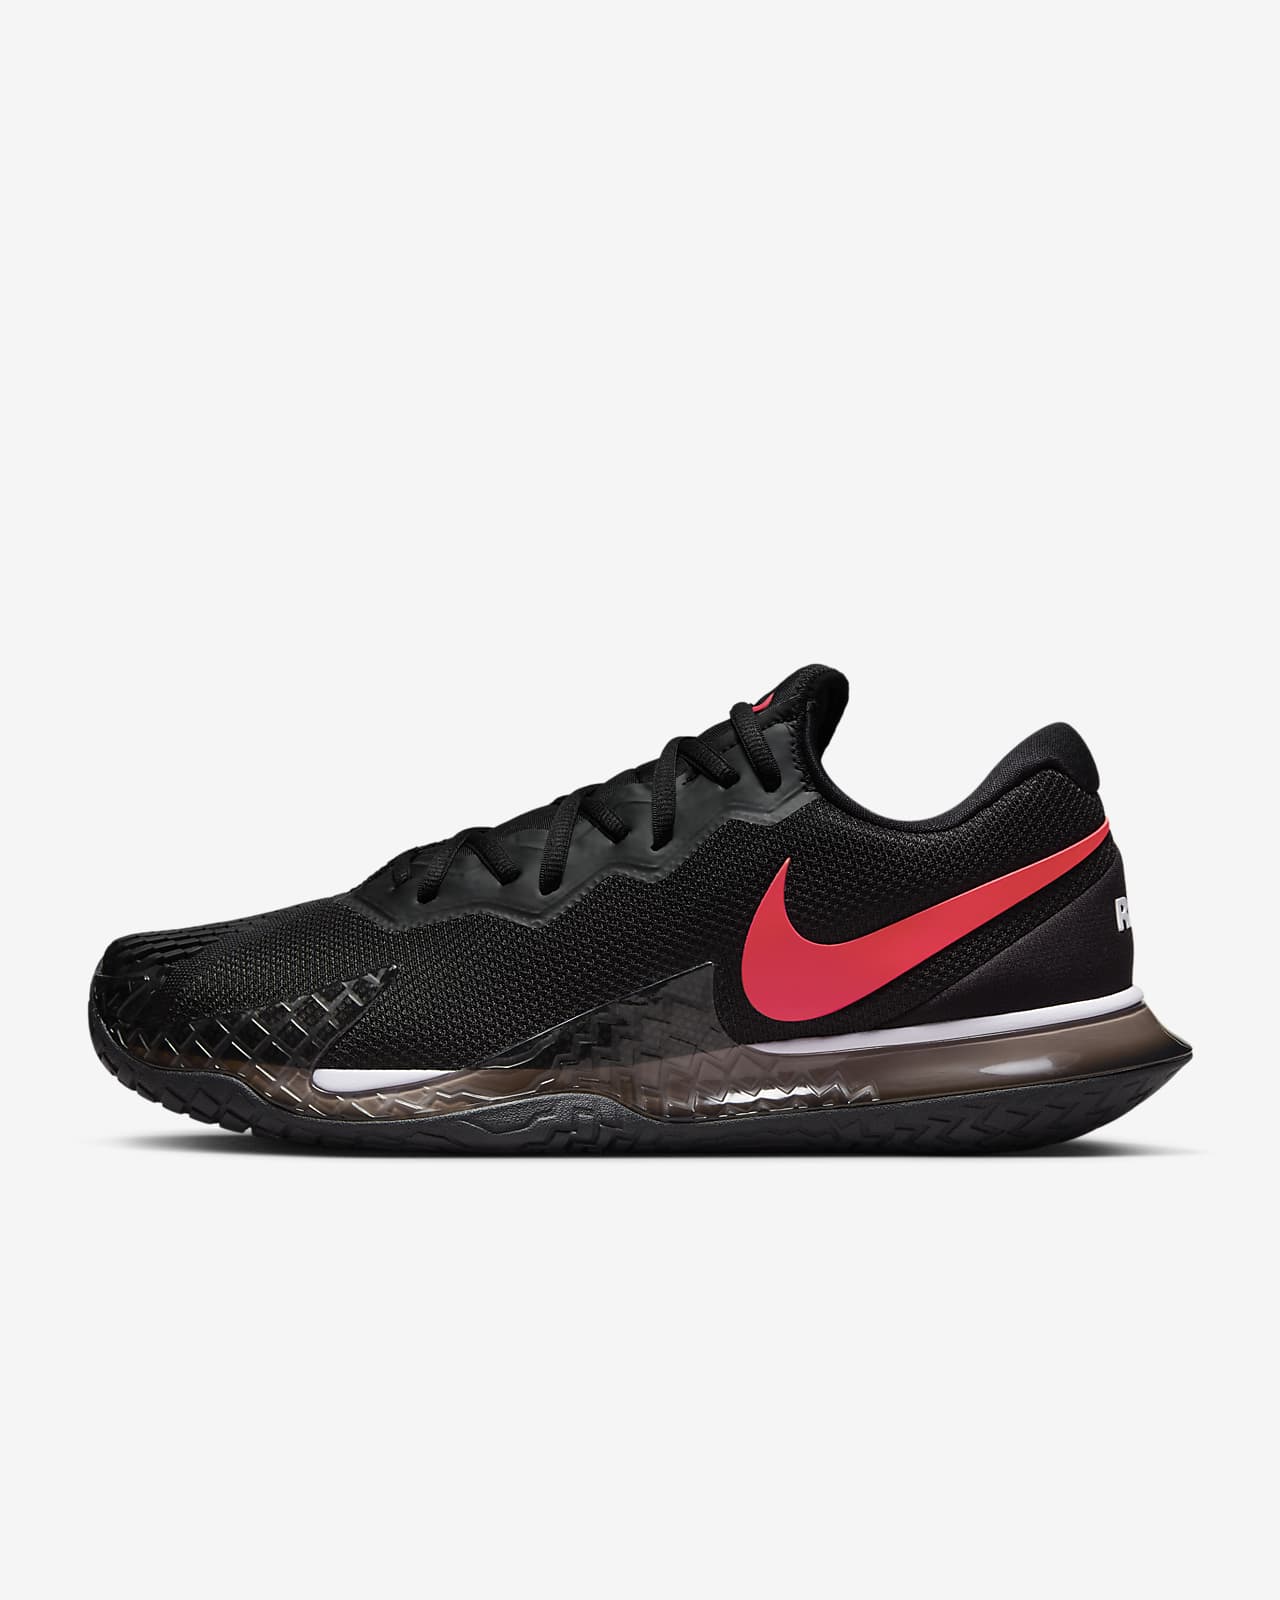 Comfort and Fit of Nike Court Zoom Vapor Cage 4